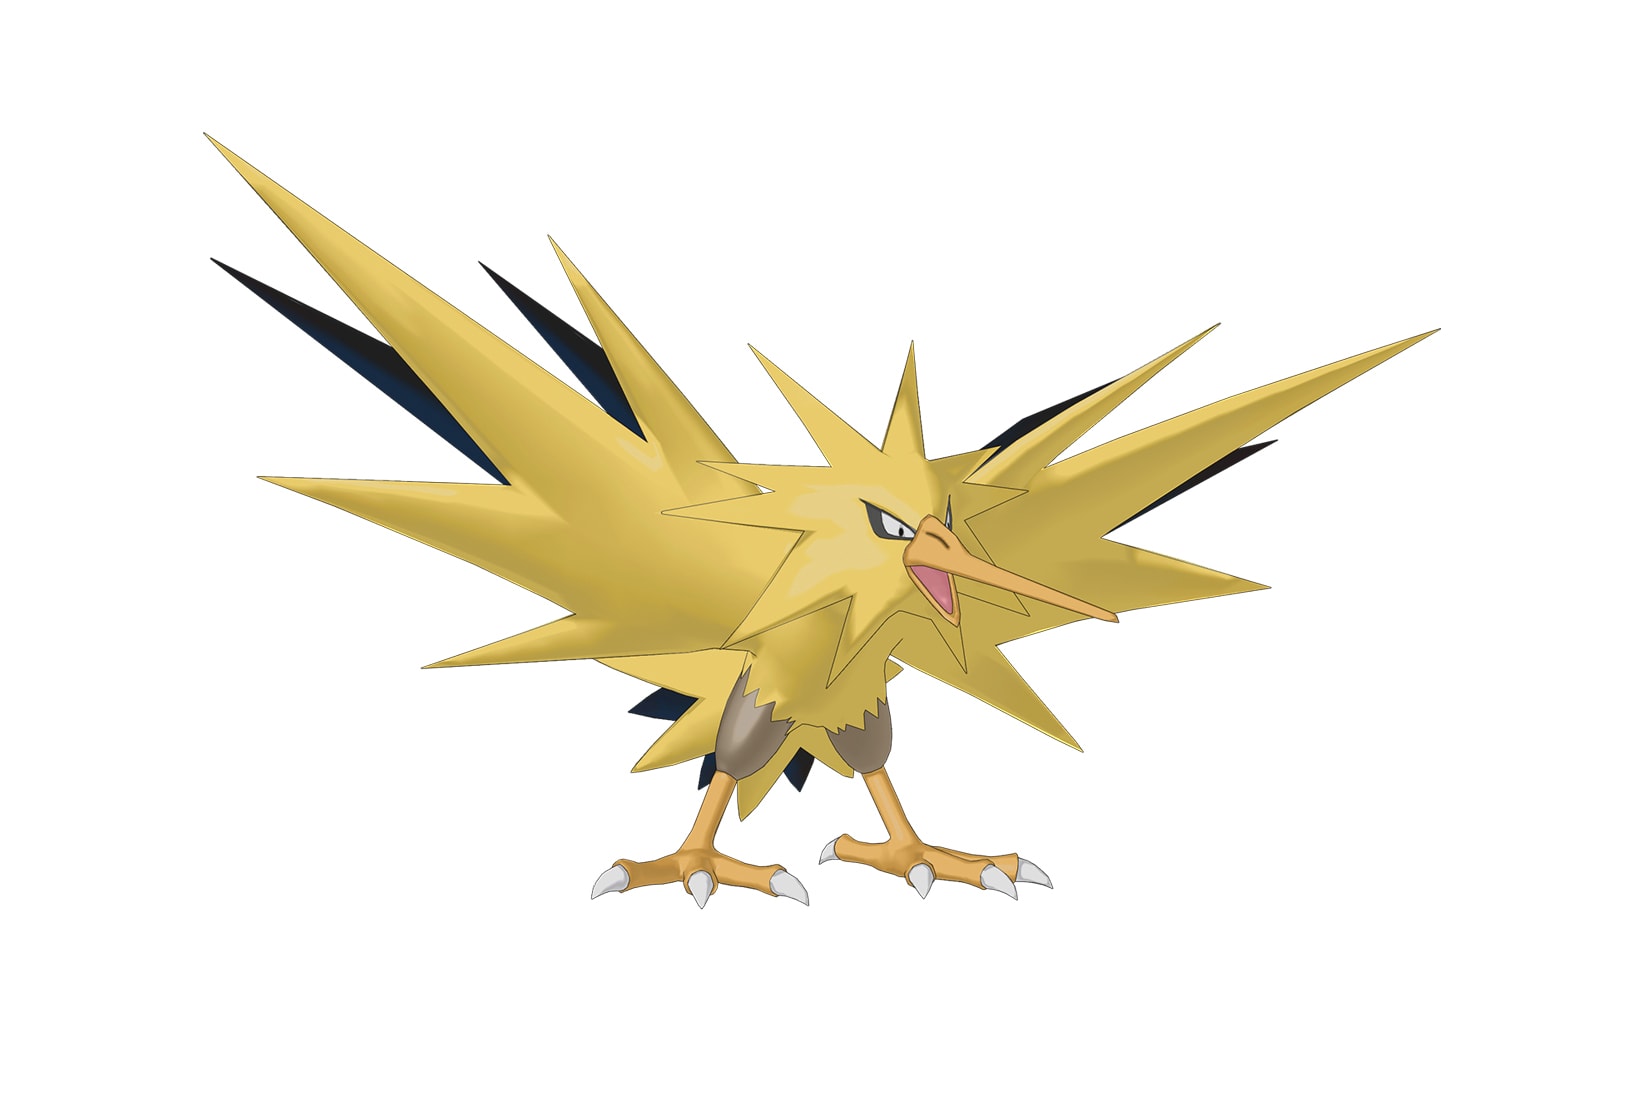 Pokemon Go Shiny Zapdos Day - Start time and Raid news for big event, Gaming, Entertainment